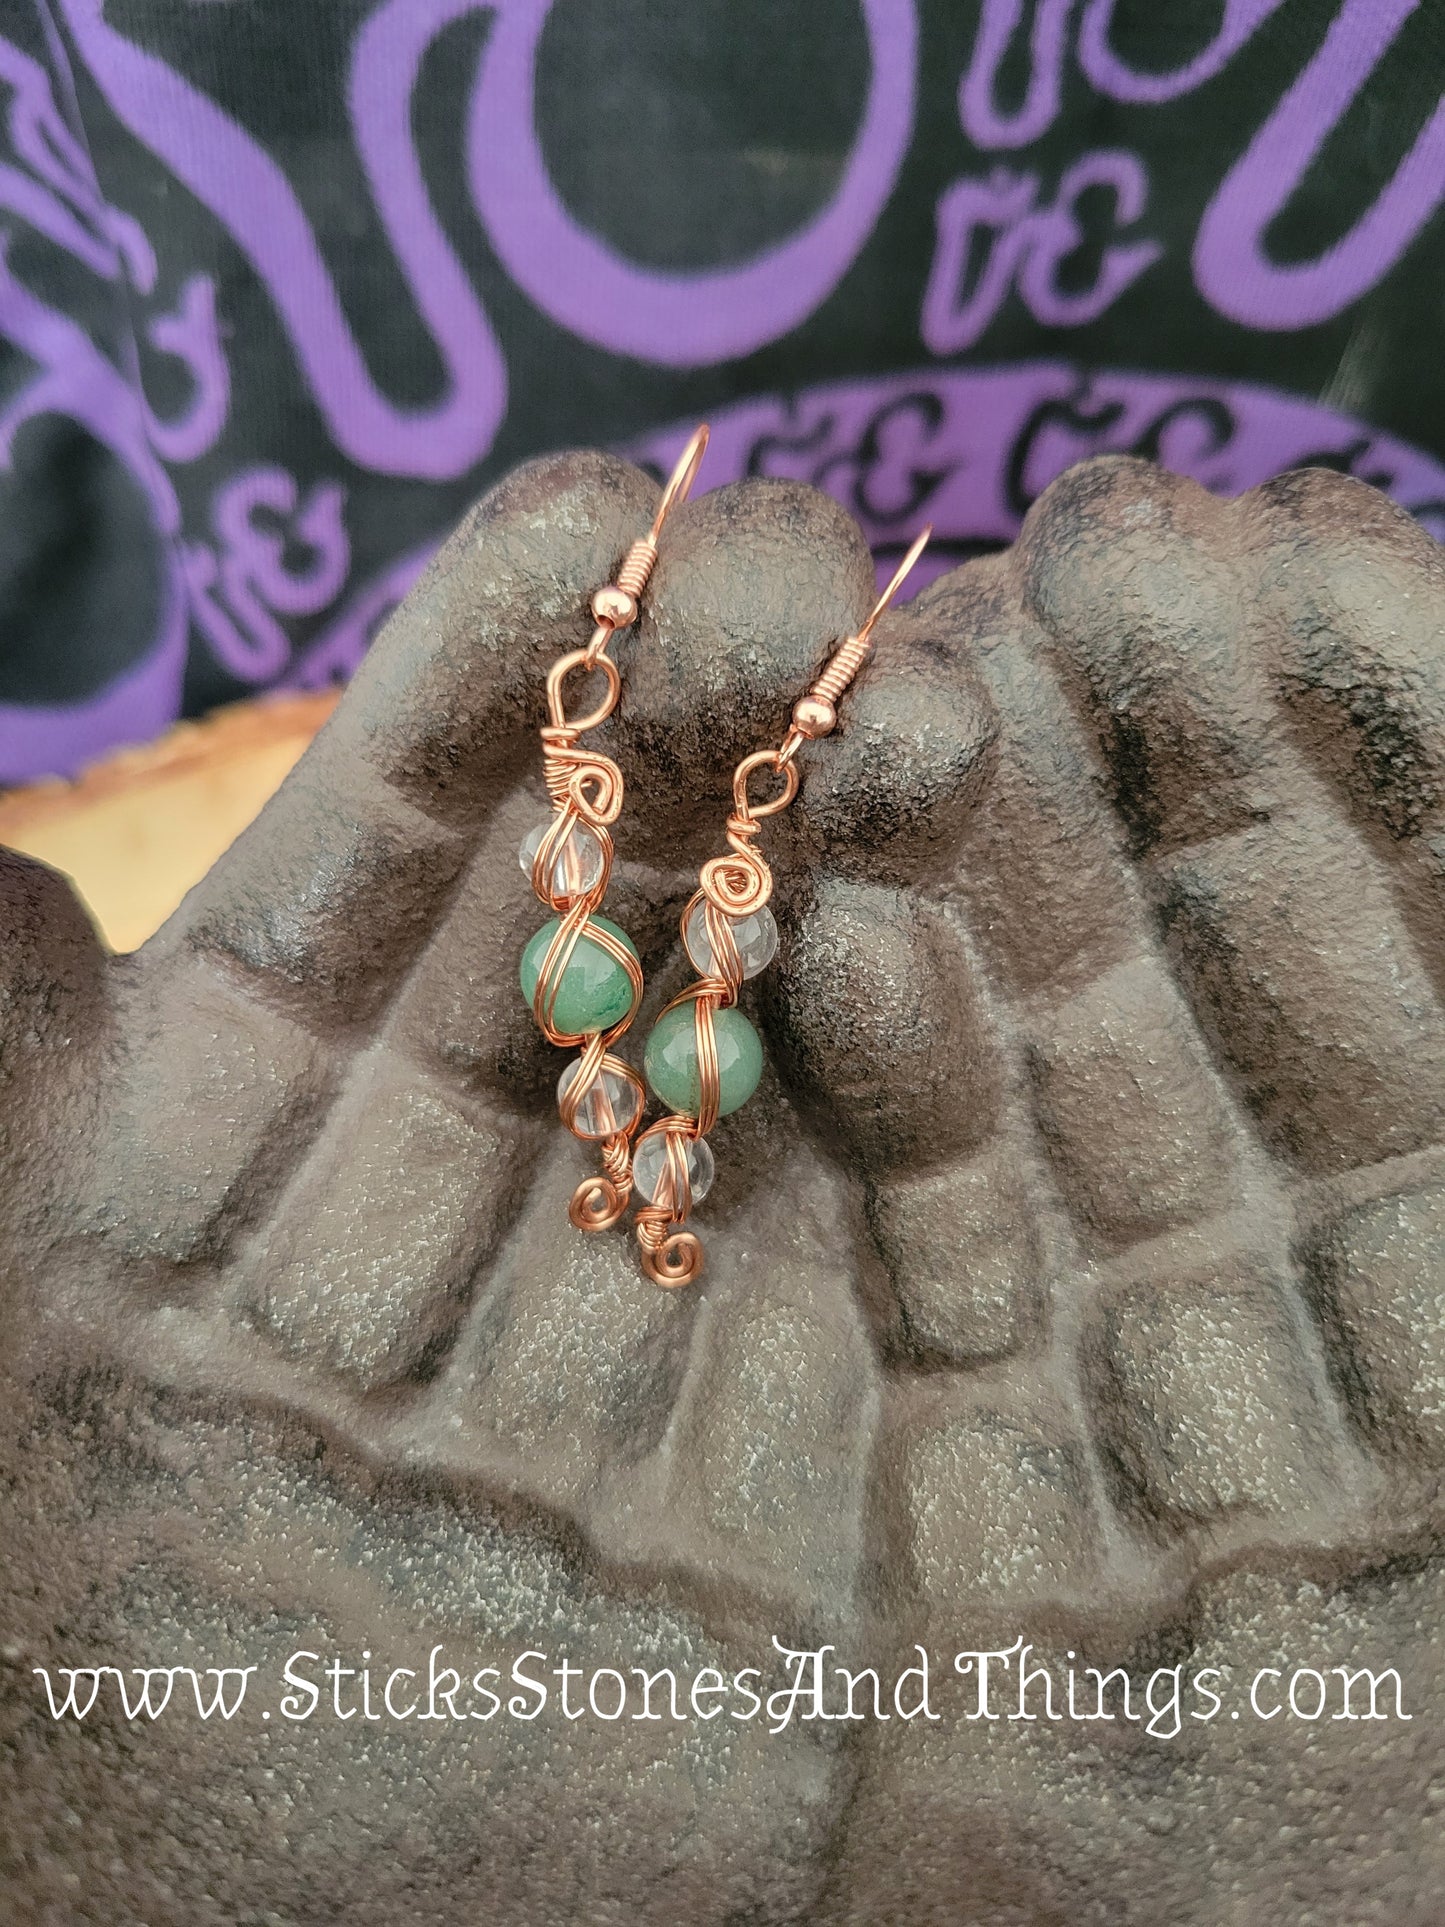 Green Aventurine and Clear Quartz Wire-Wrapped Earrings